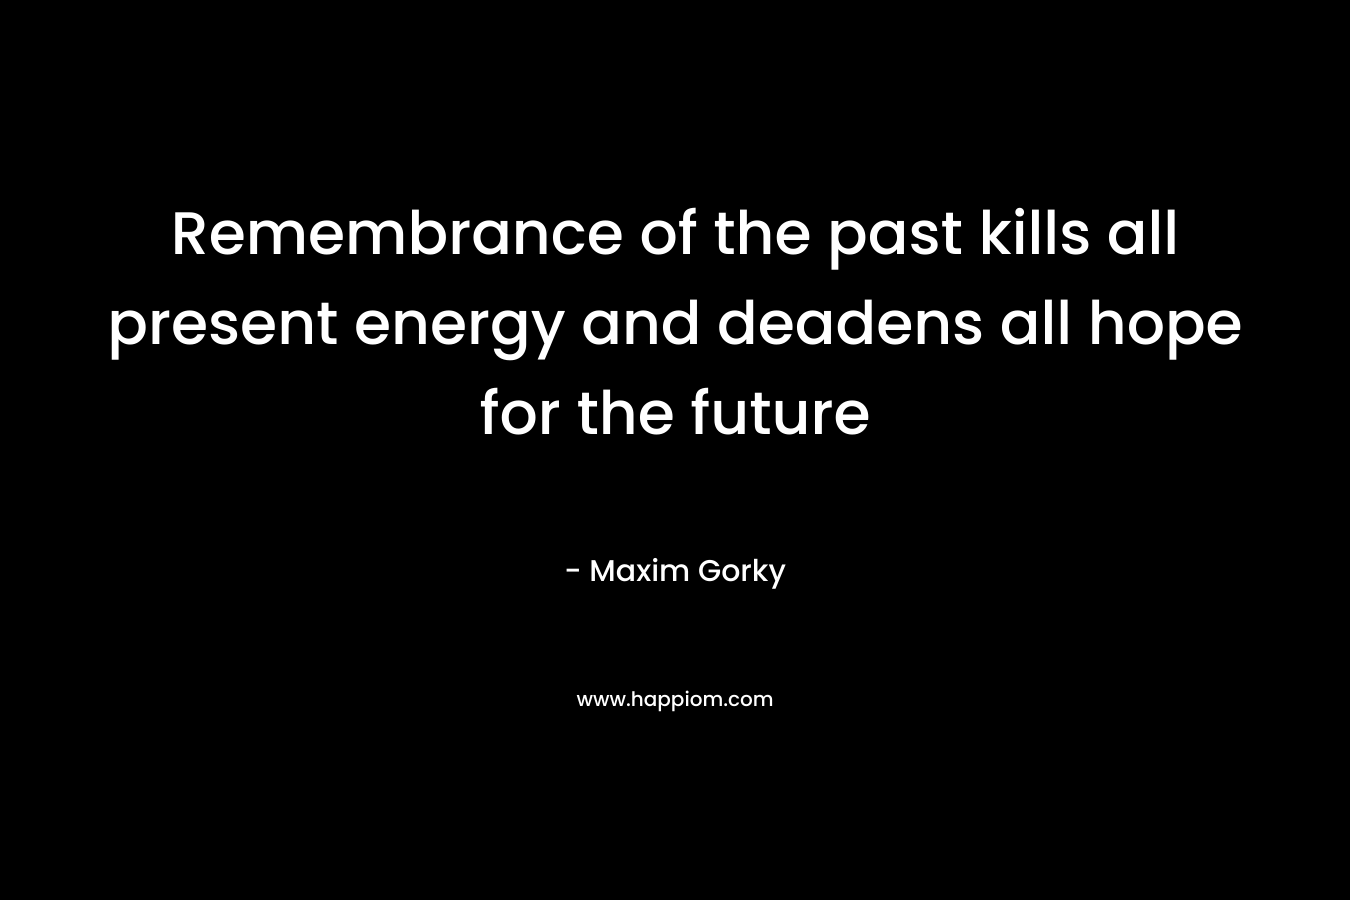 Remembrance of the past kills all present energy and deadens all hope for the future – Maxim Gorky